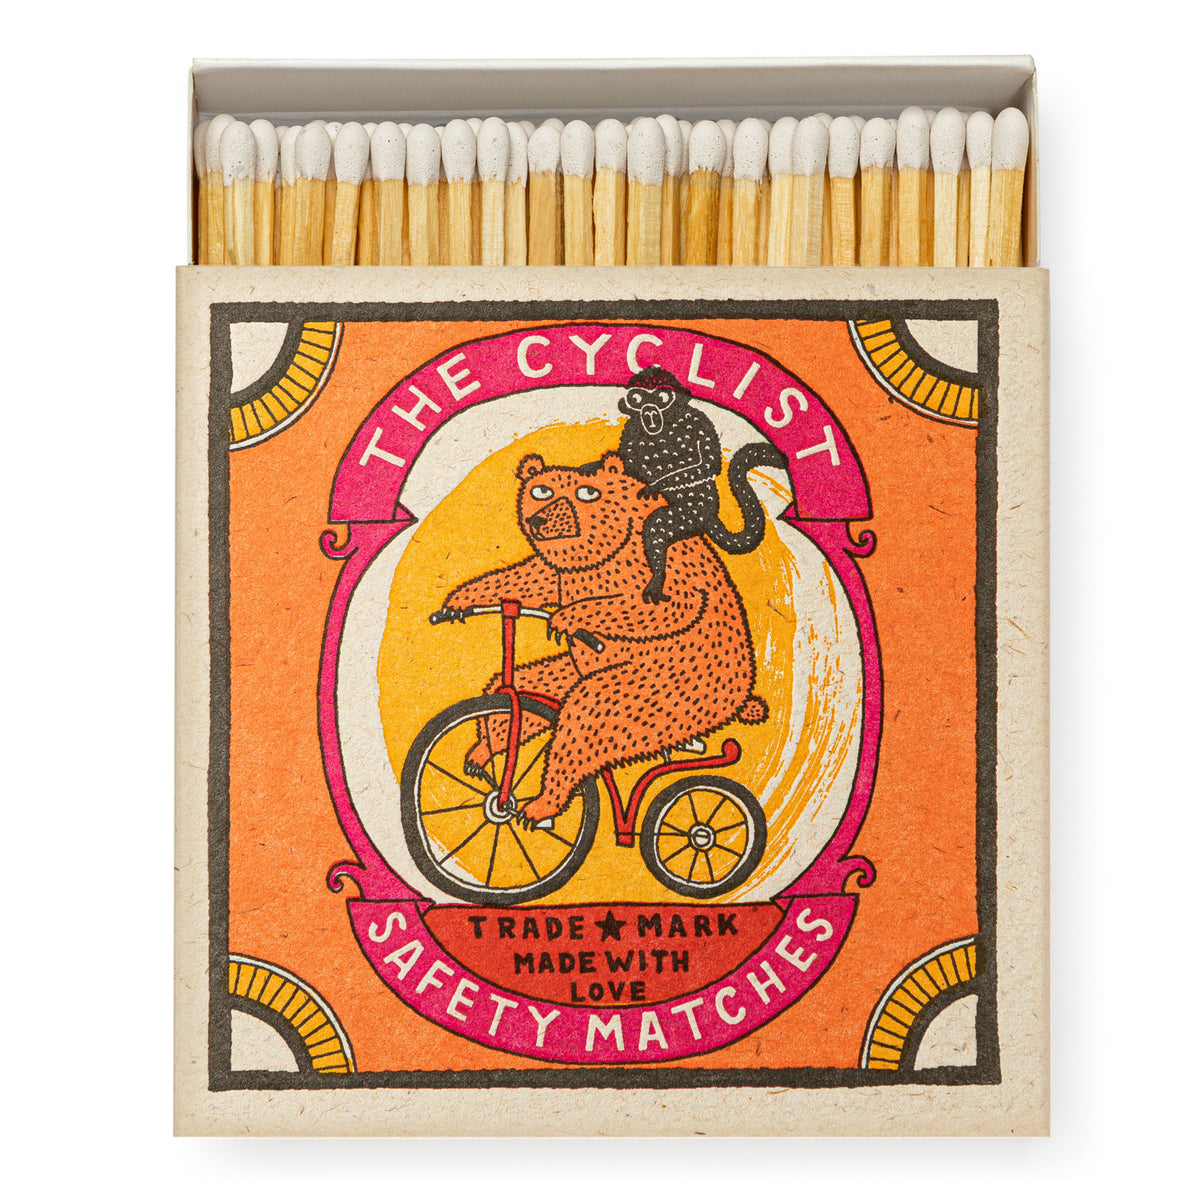 The Archivist Cyclist Safety Matches